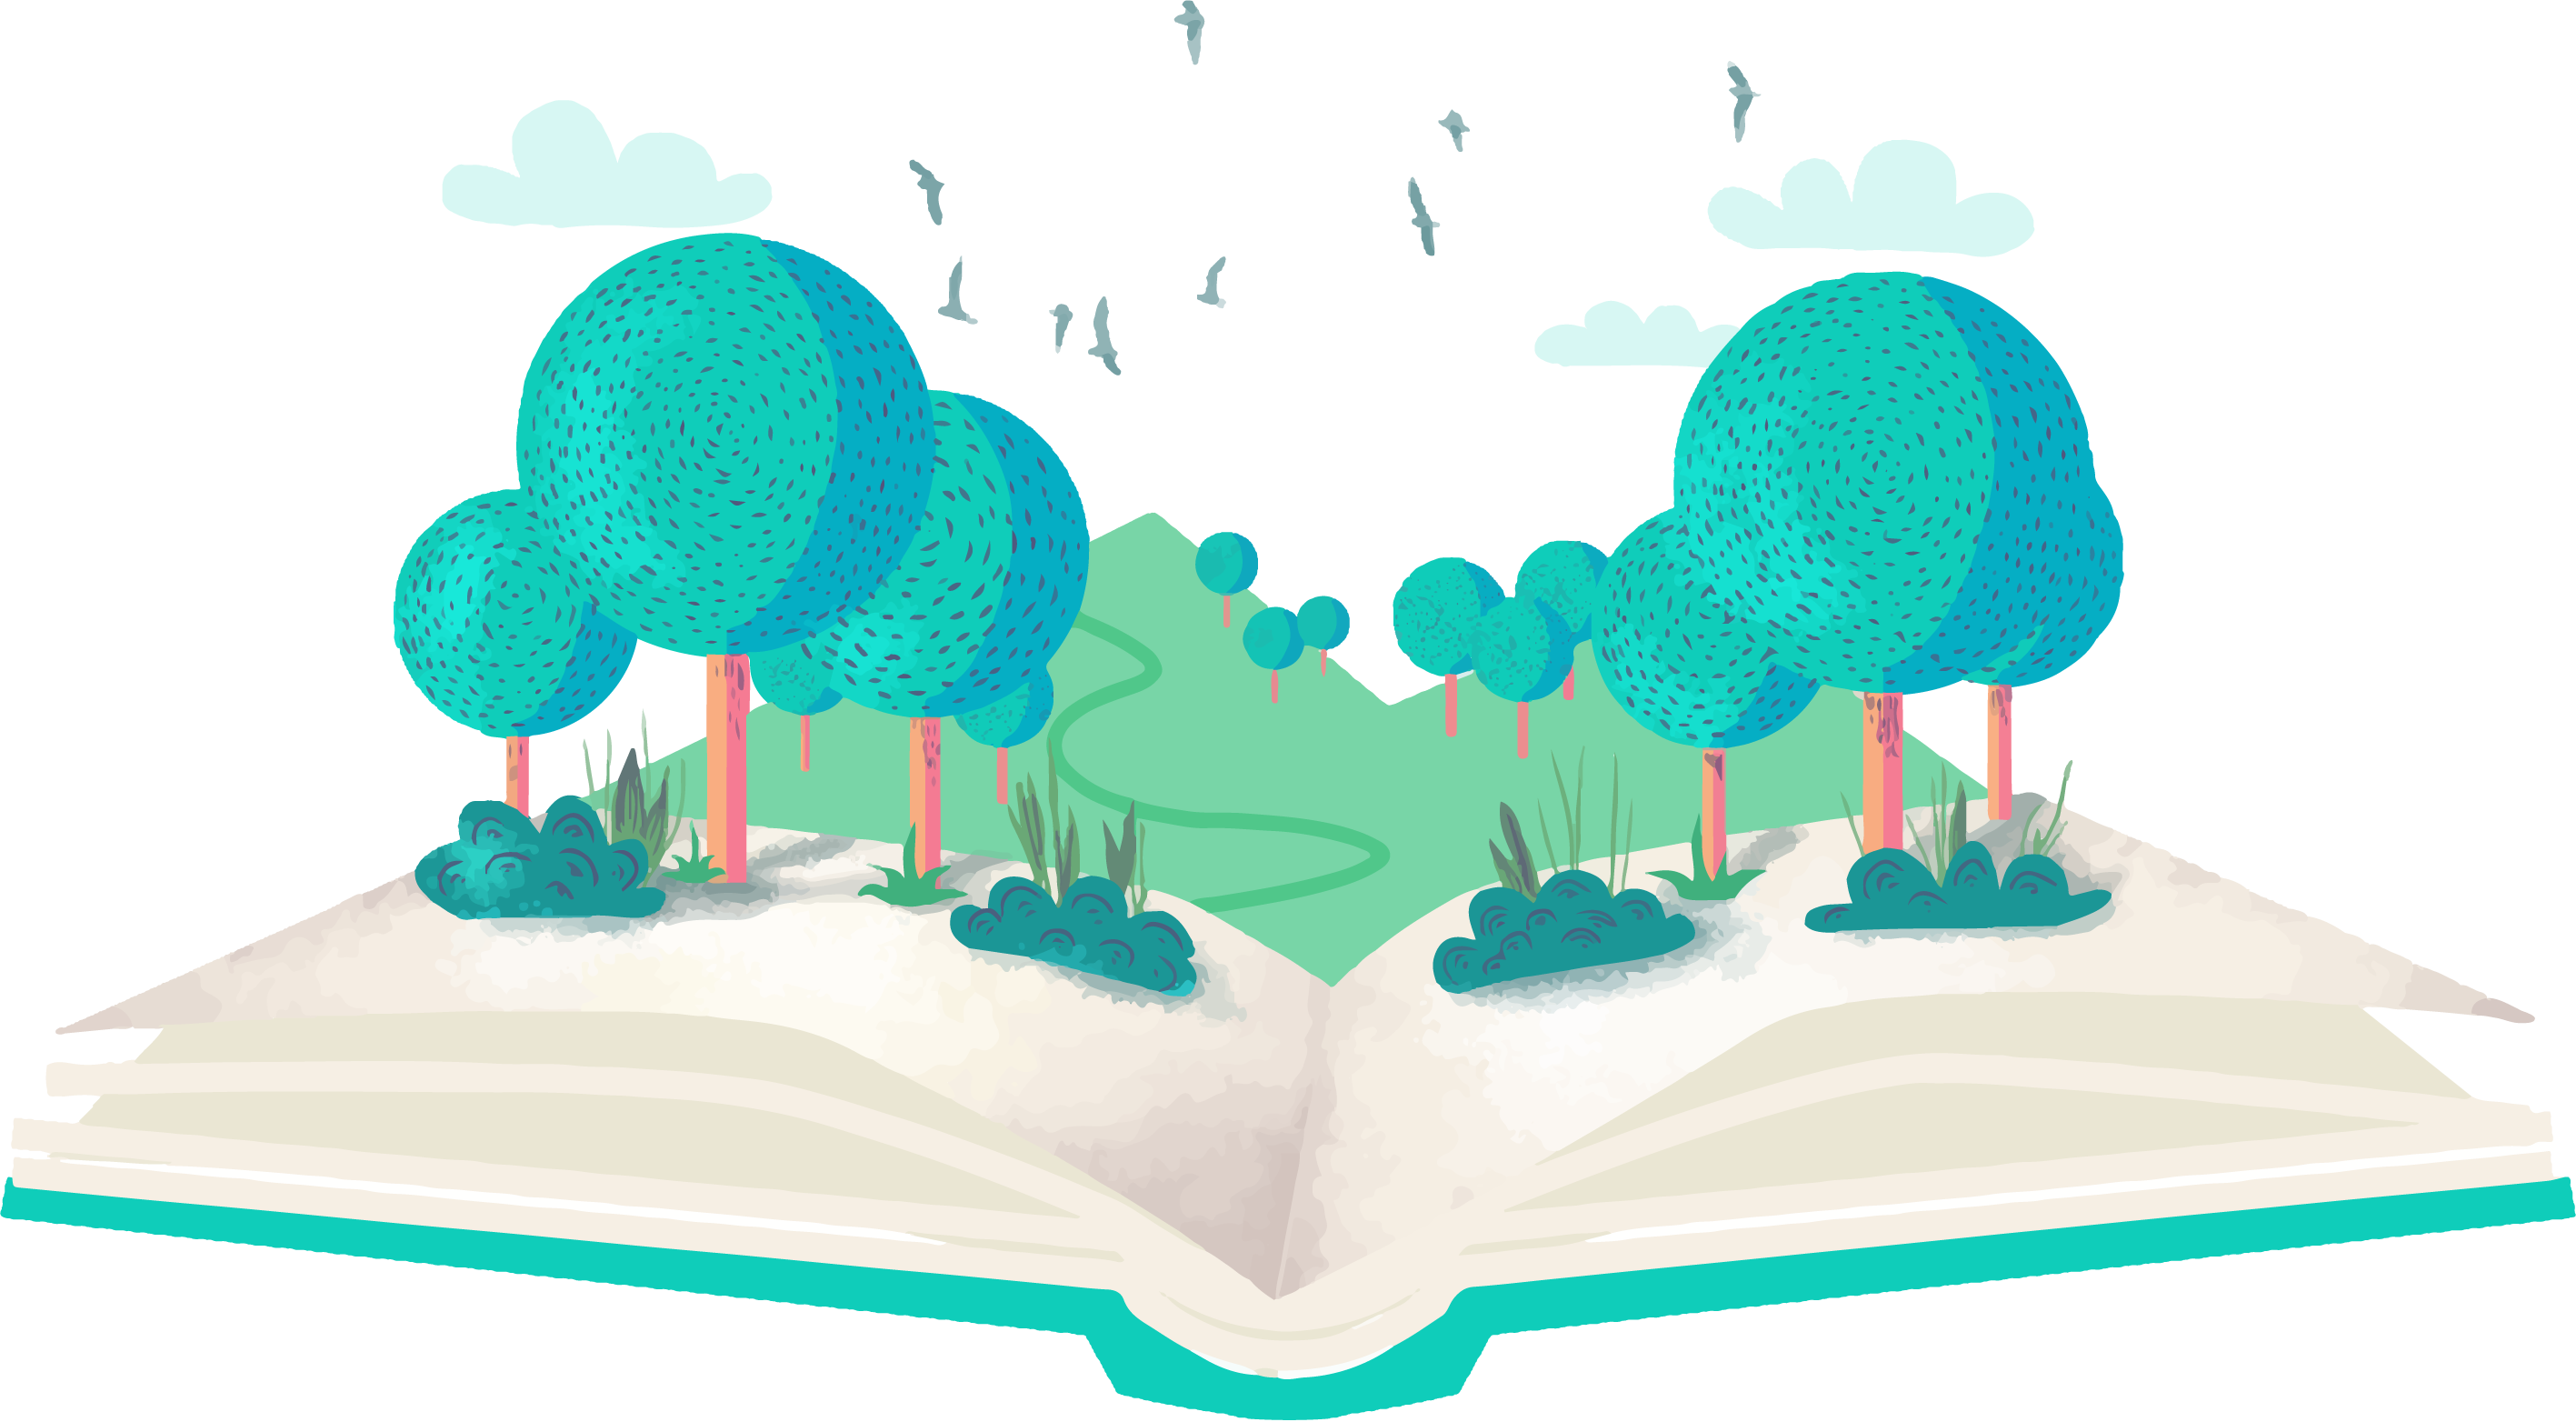 A book with a forest in it